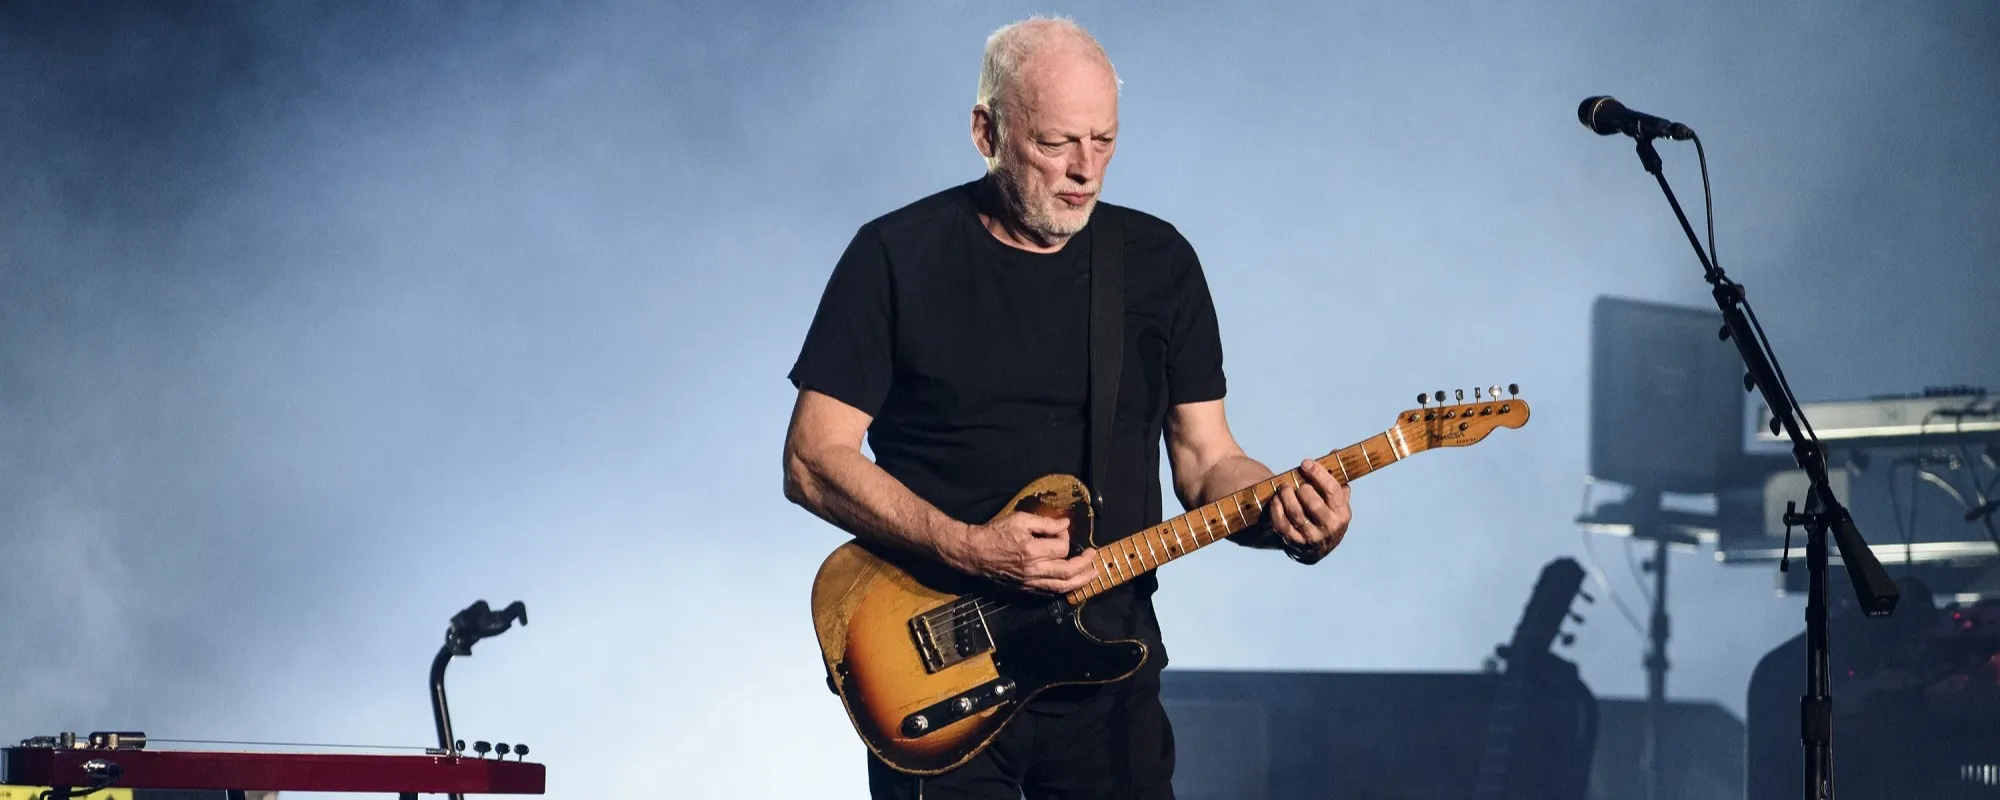 Ex-Pink Floyd Guitarist David Gilmour Has New Music on the Way, Wife Polly Samson Confirms